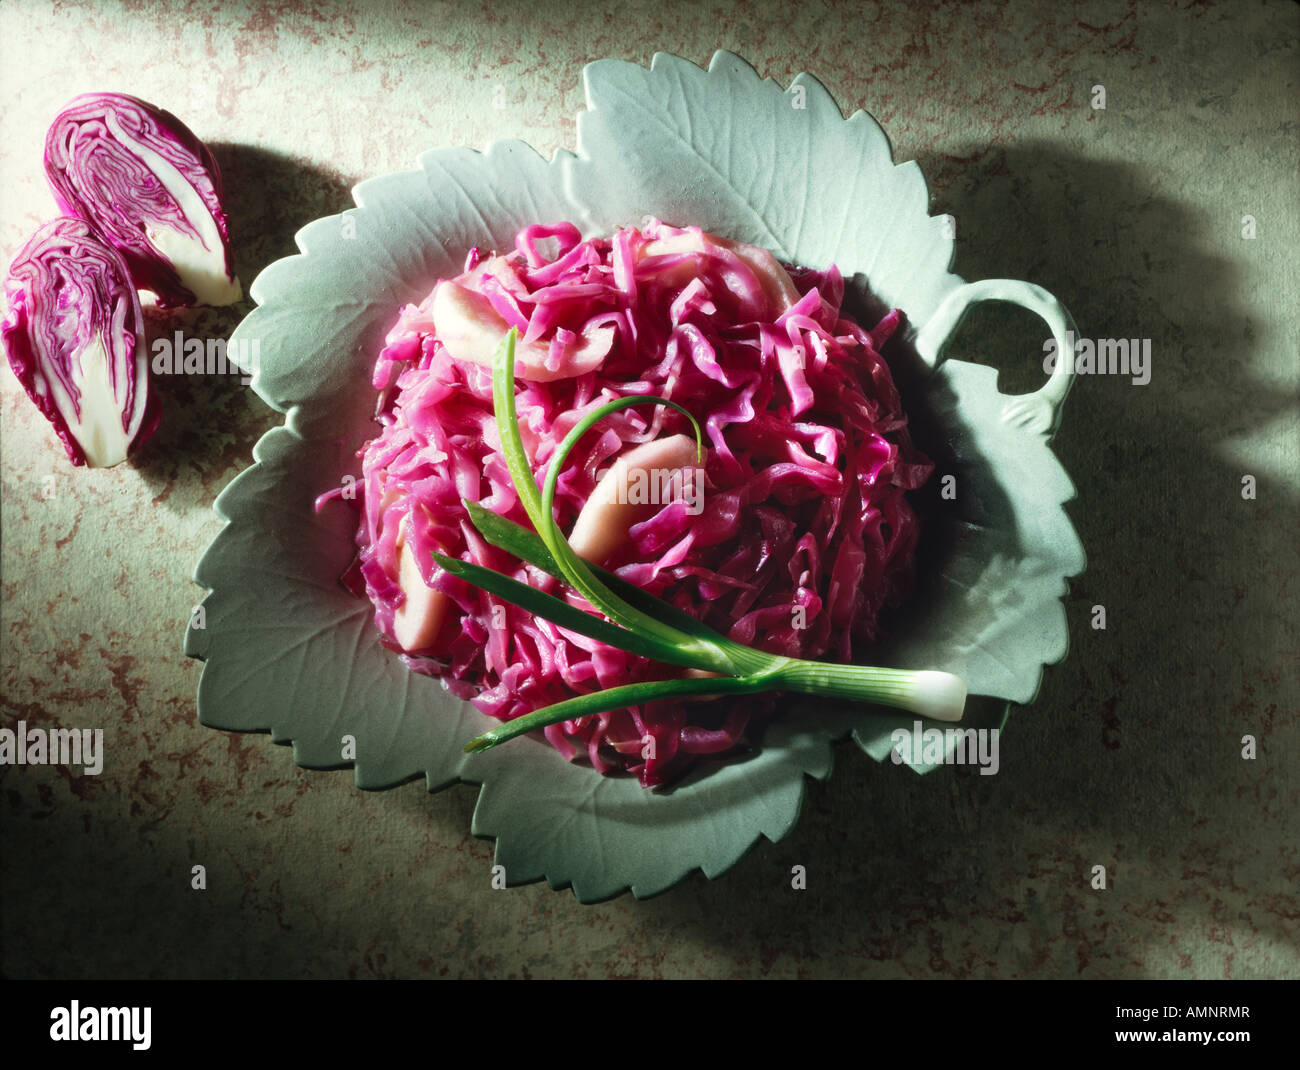 Top shot of shredded red cabbage and apple salad on a grey leaf plate. Stock Photo